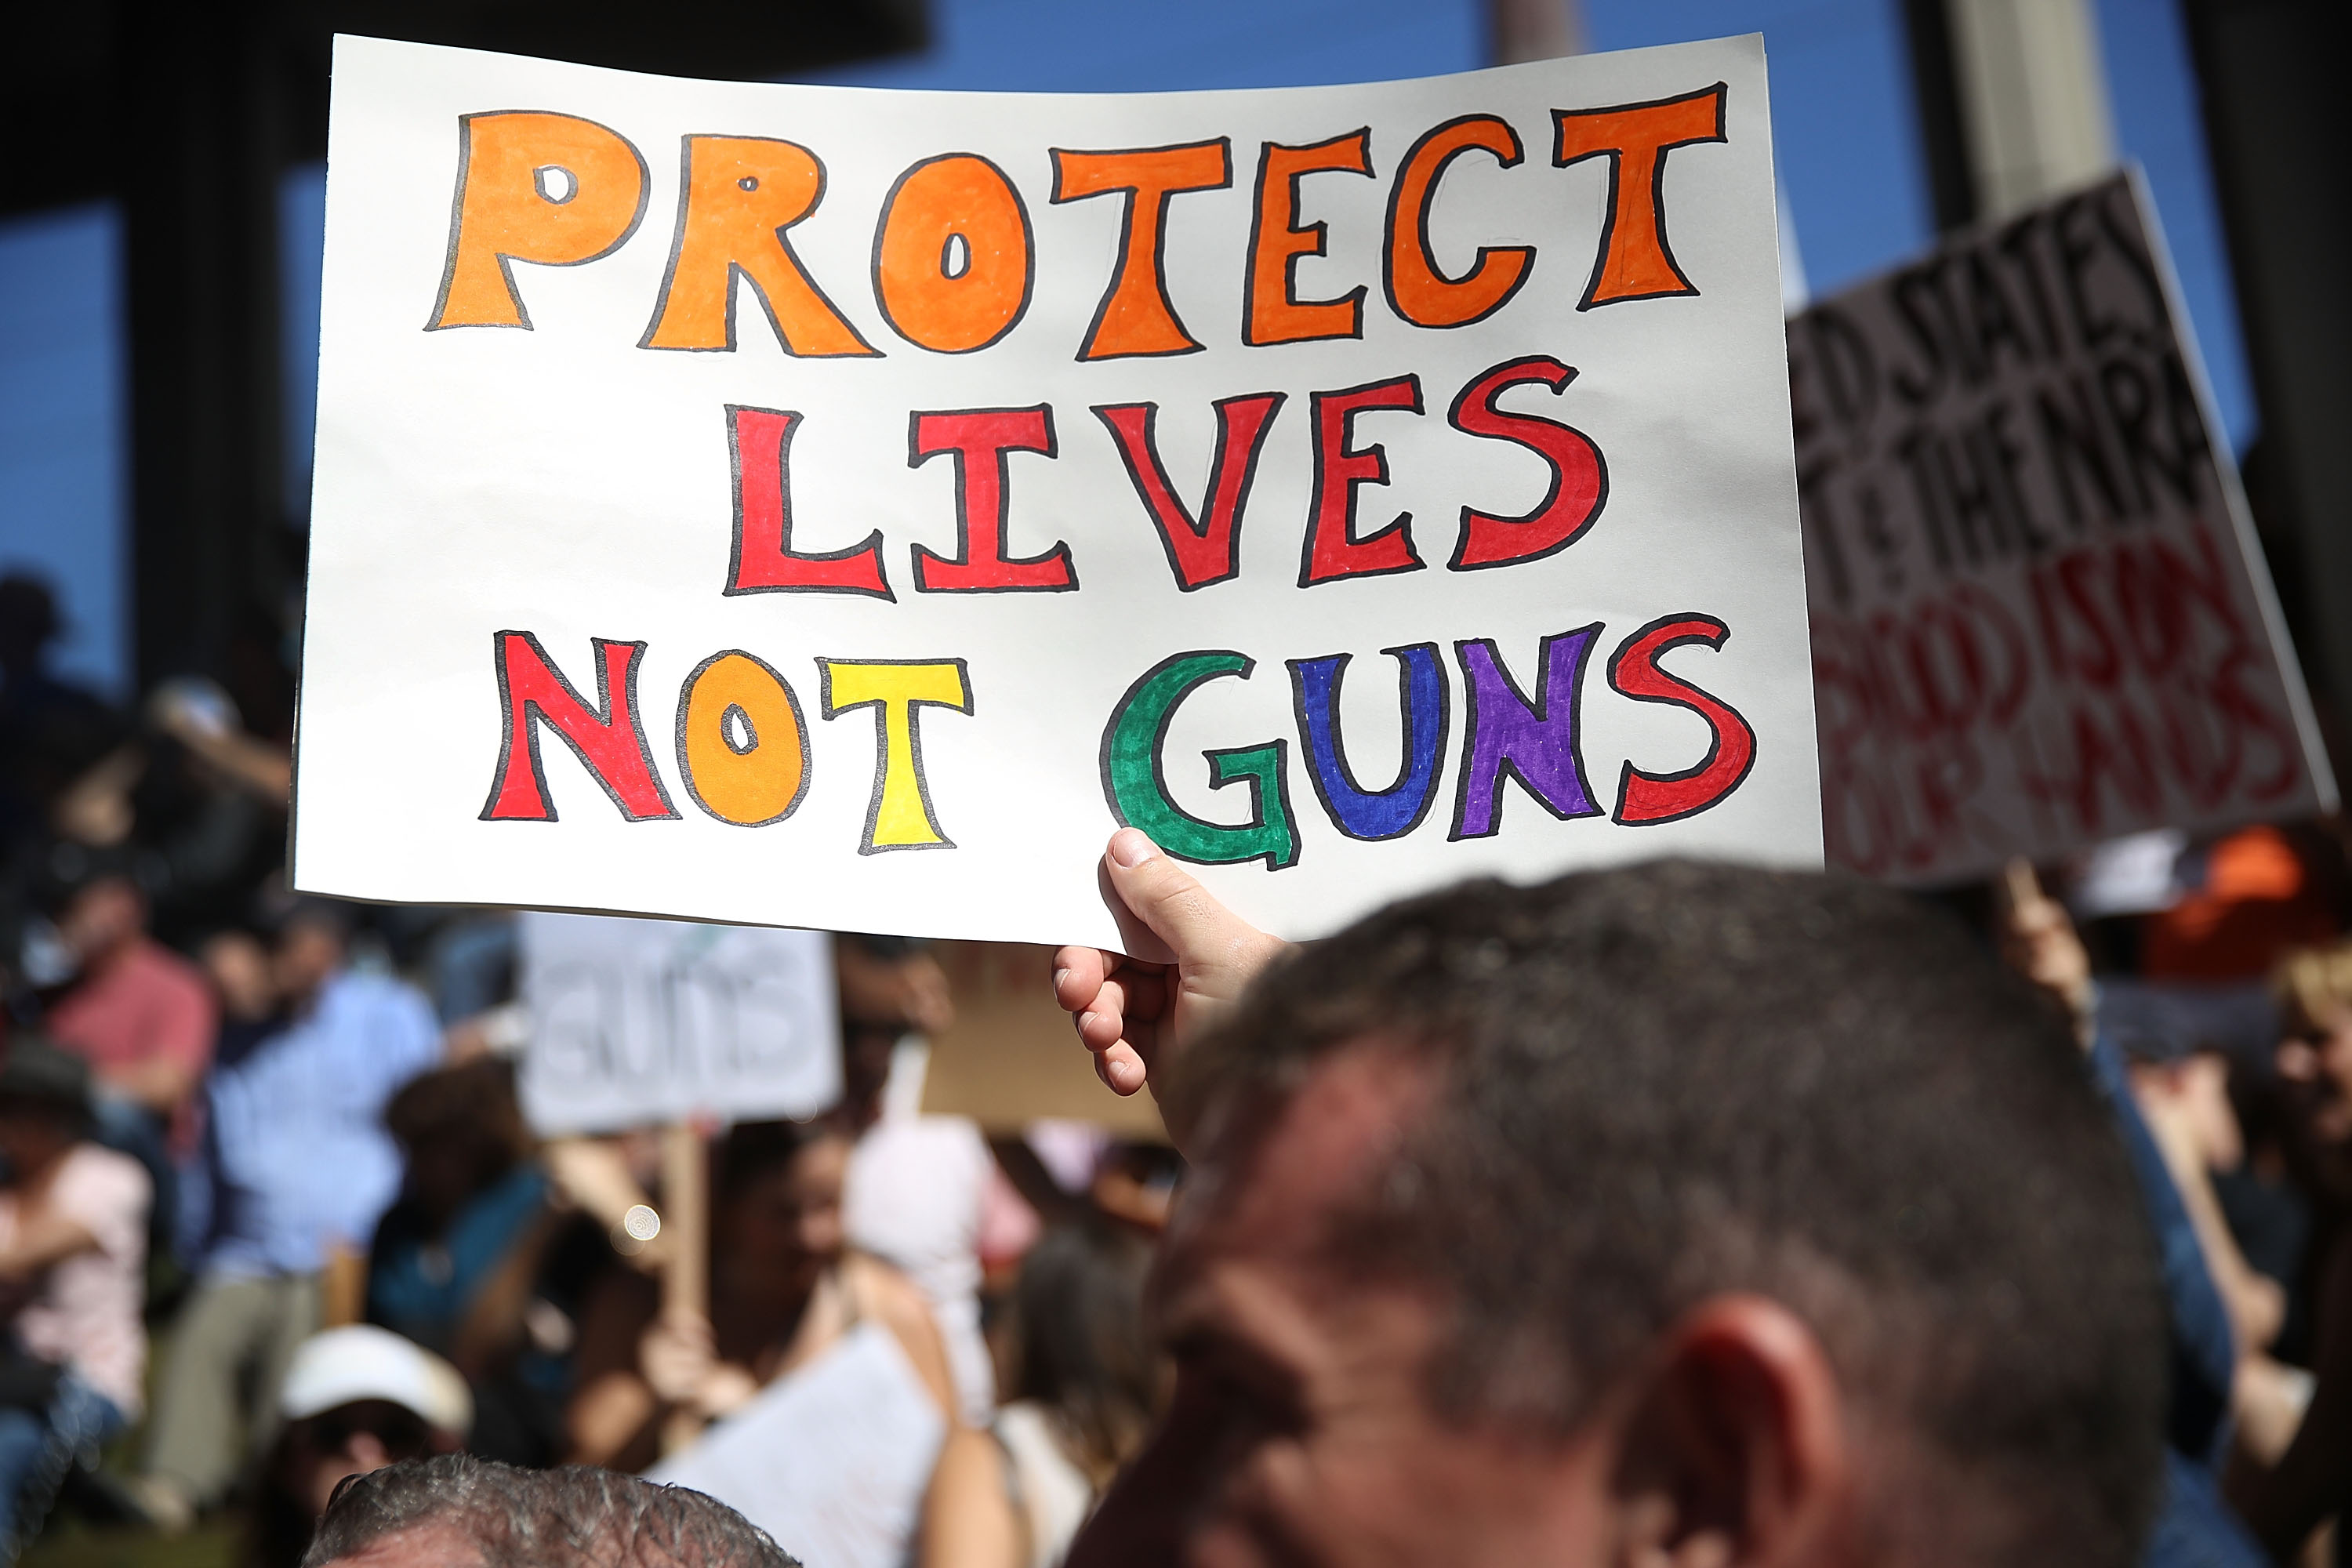 People join together after a school shooting that killed 17 to protest against guns on the steps of the Broward County Federal courthouse on February 17, 2018 in Fort Lauderdale, Florida. Earlier this week former student Nikolas Cruz opened fire with a AR-15 rifle at the Marjory Stoneman Douglas High School killing 17 people.  (Photo by Joe Raedle/Getty Images) (Joe Raedle—Getty Images)